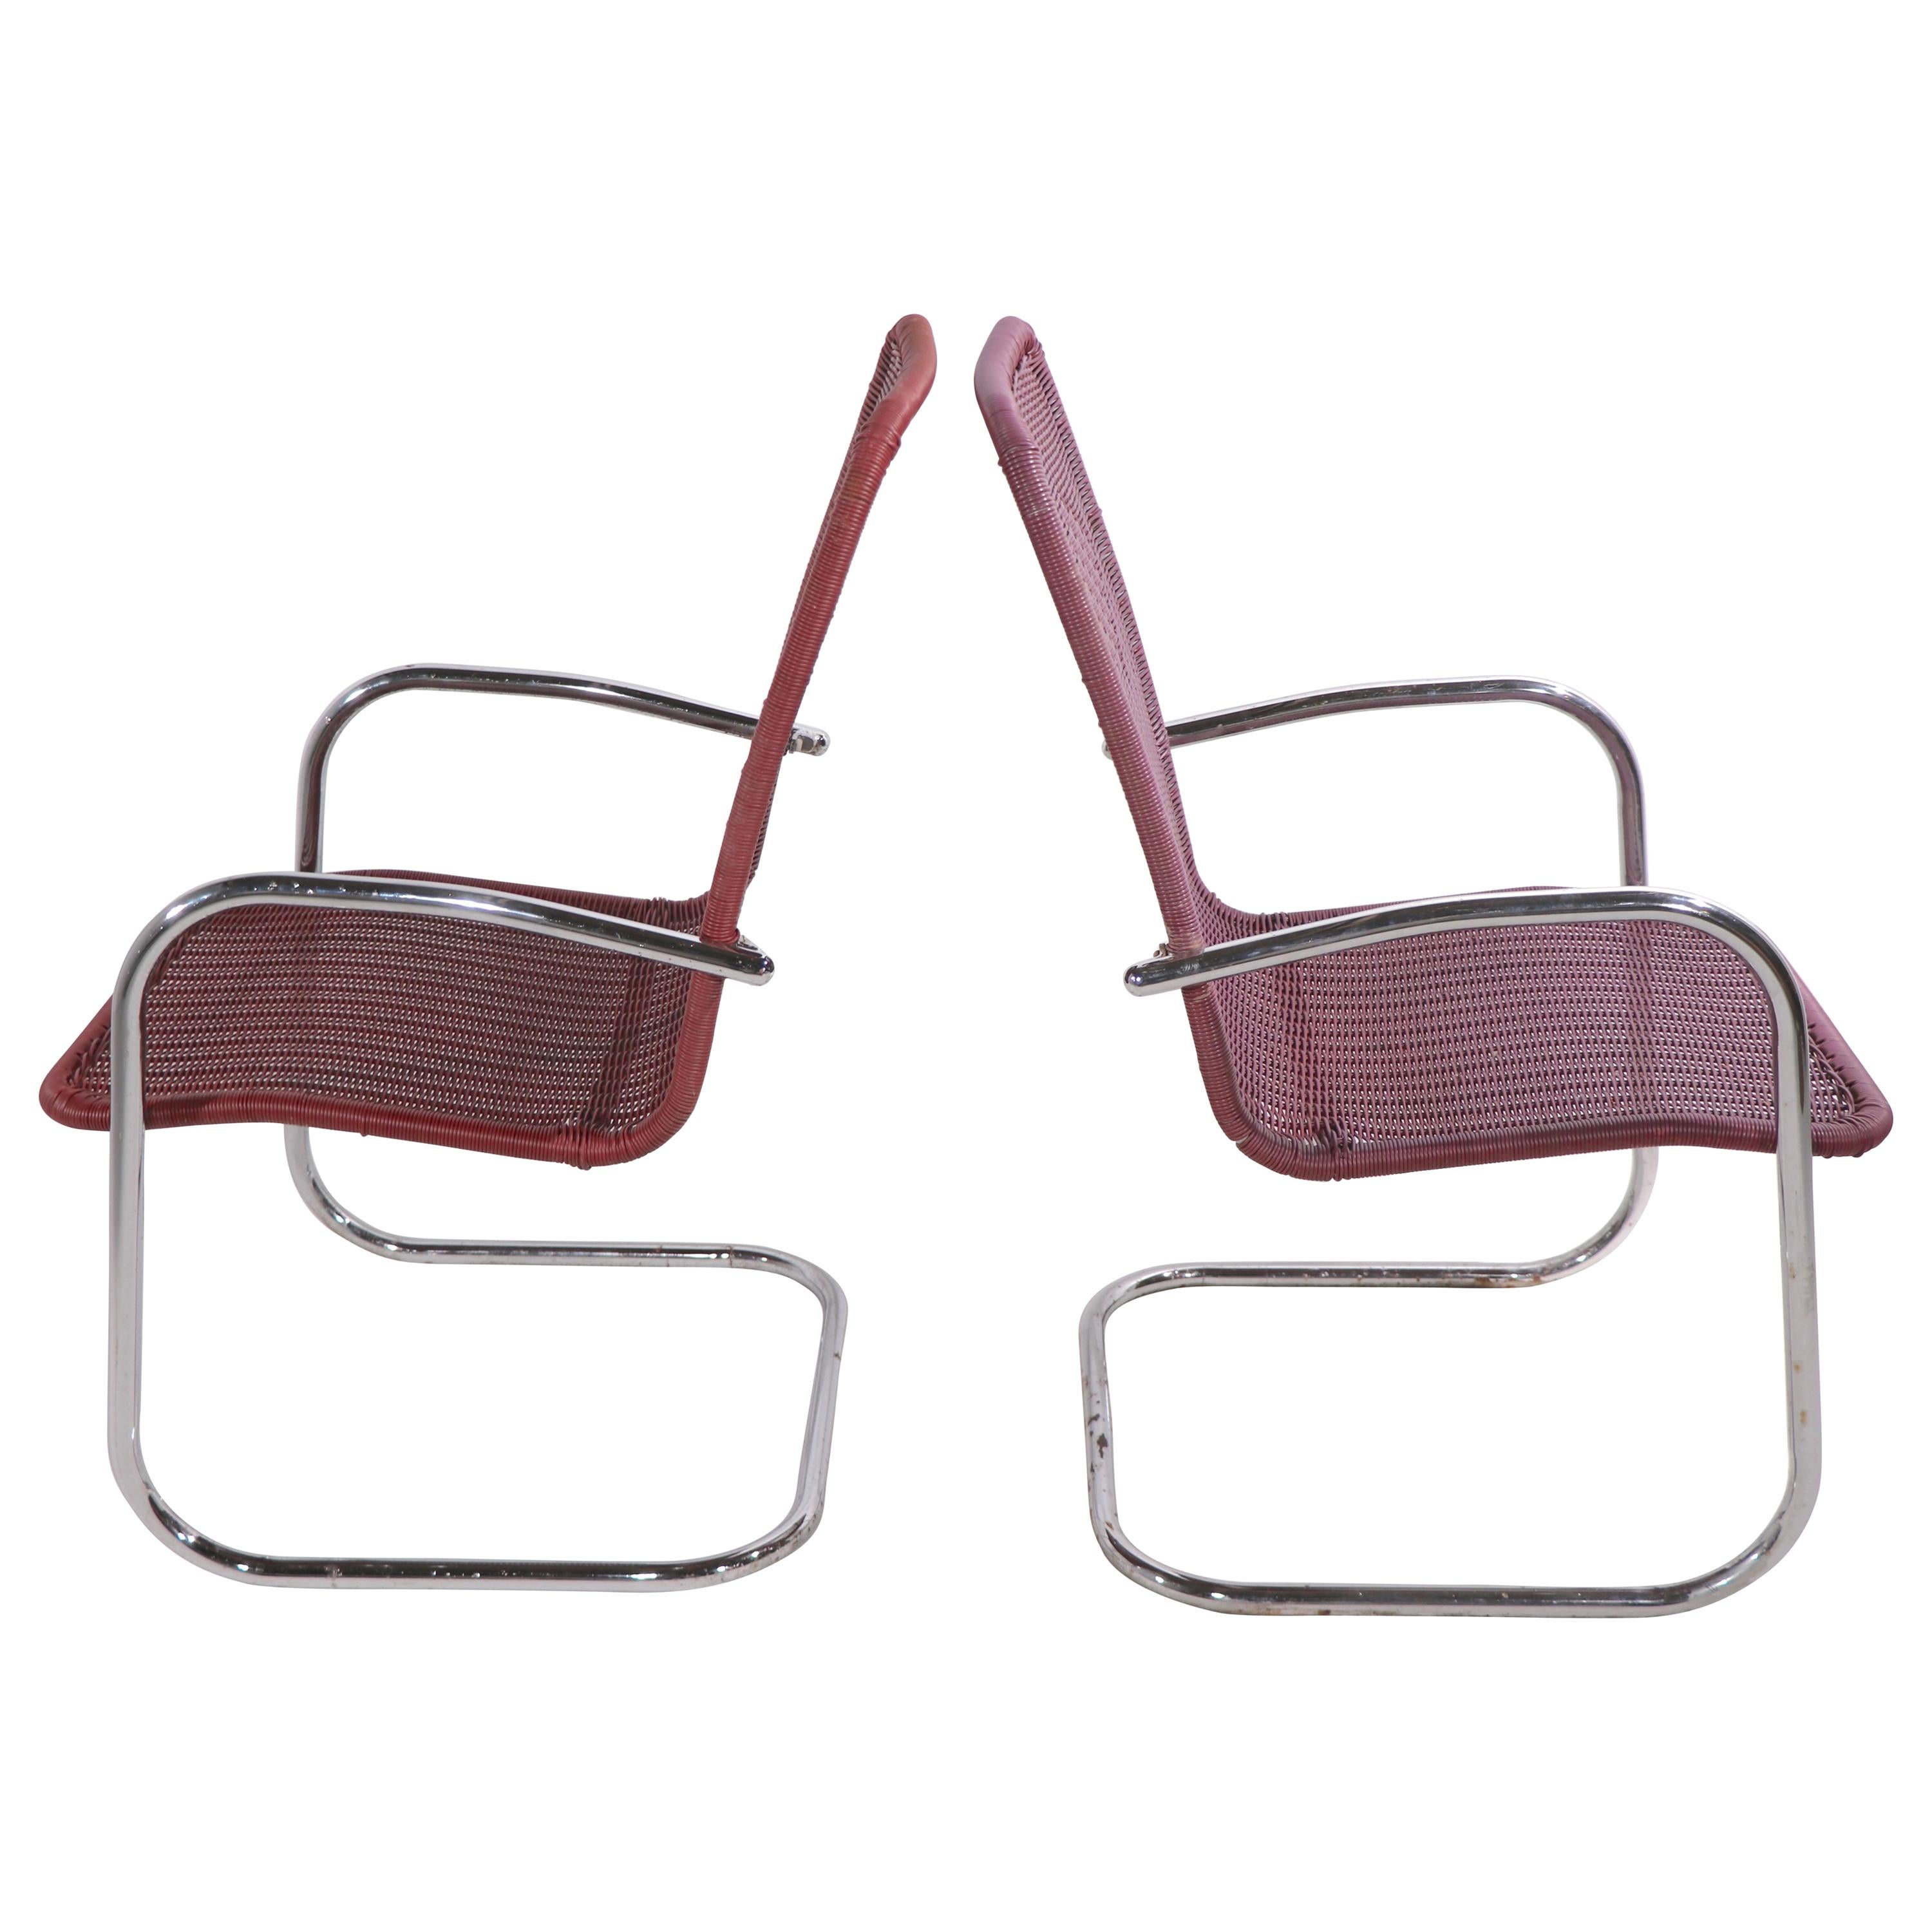 Pr. Tubular Chrome and Woven Plastic Cantilevered Lounge Chairs